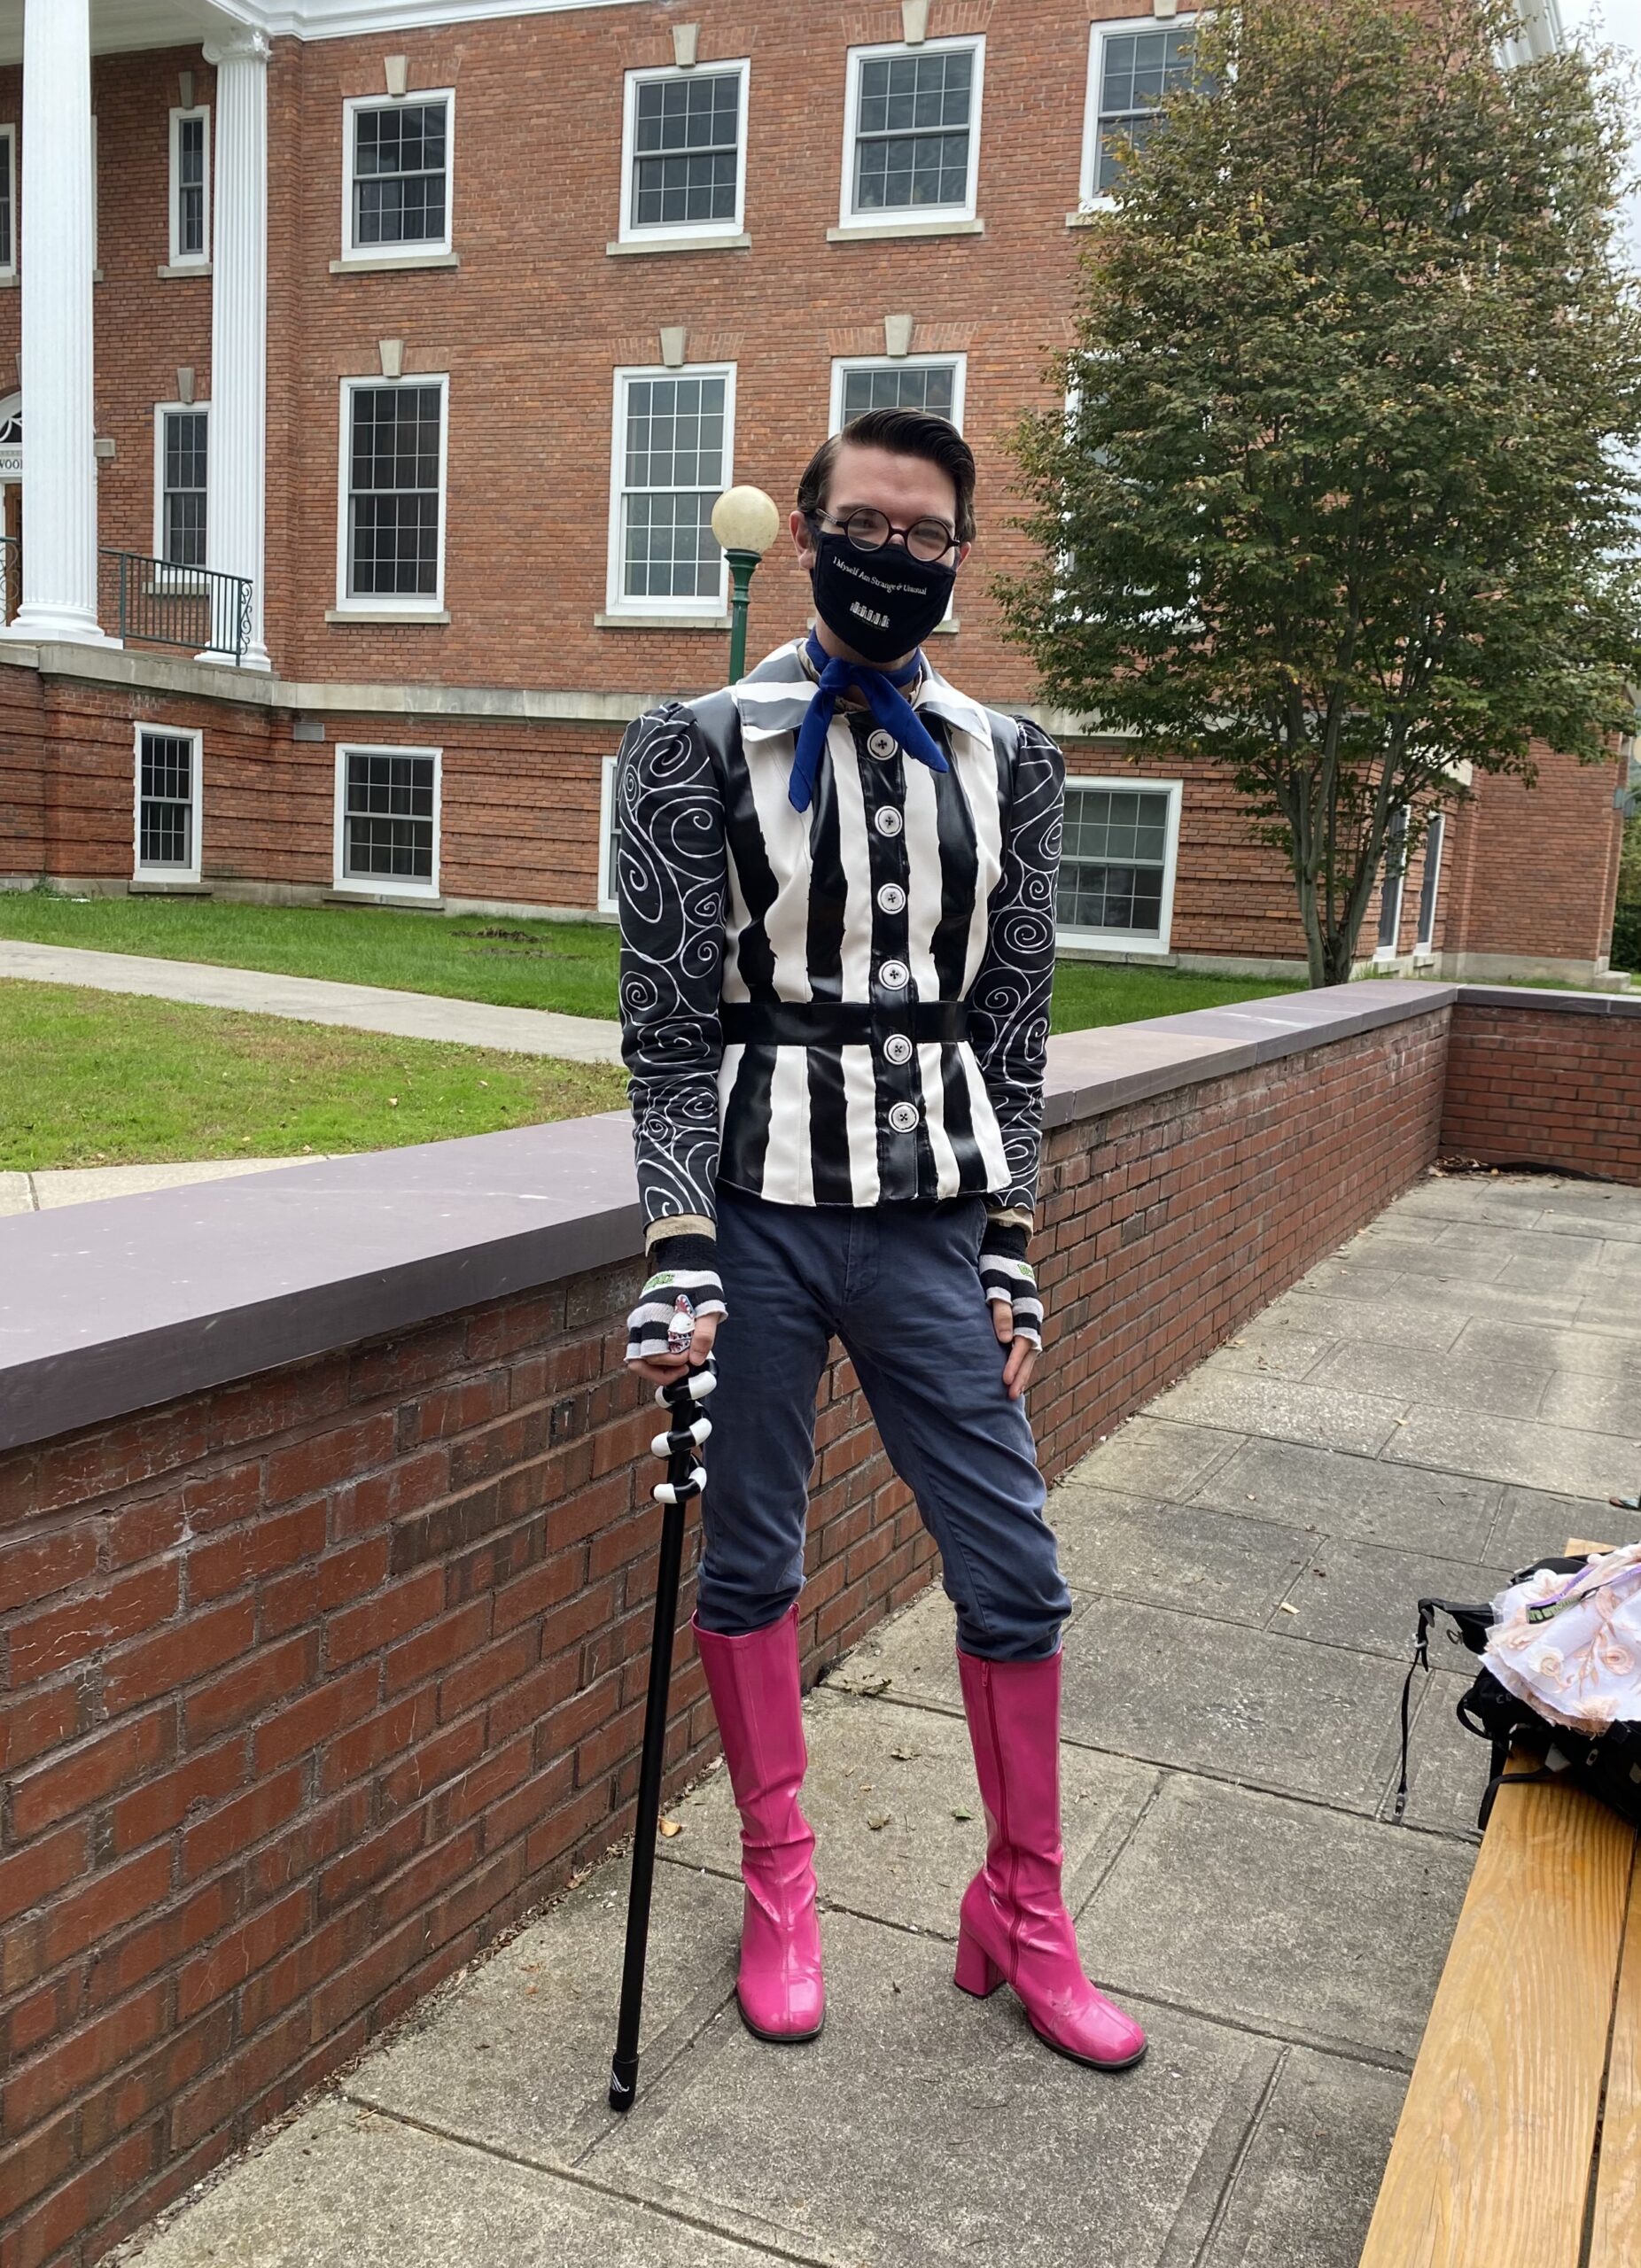 They know fashion: Students express themselves through style